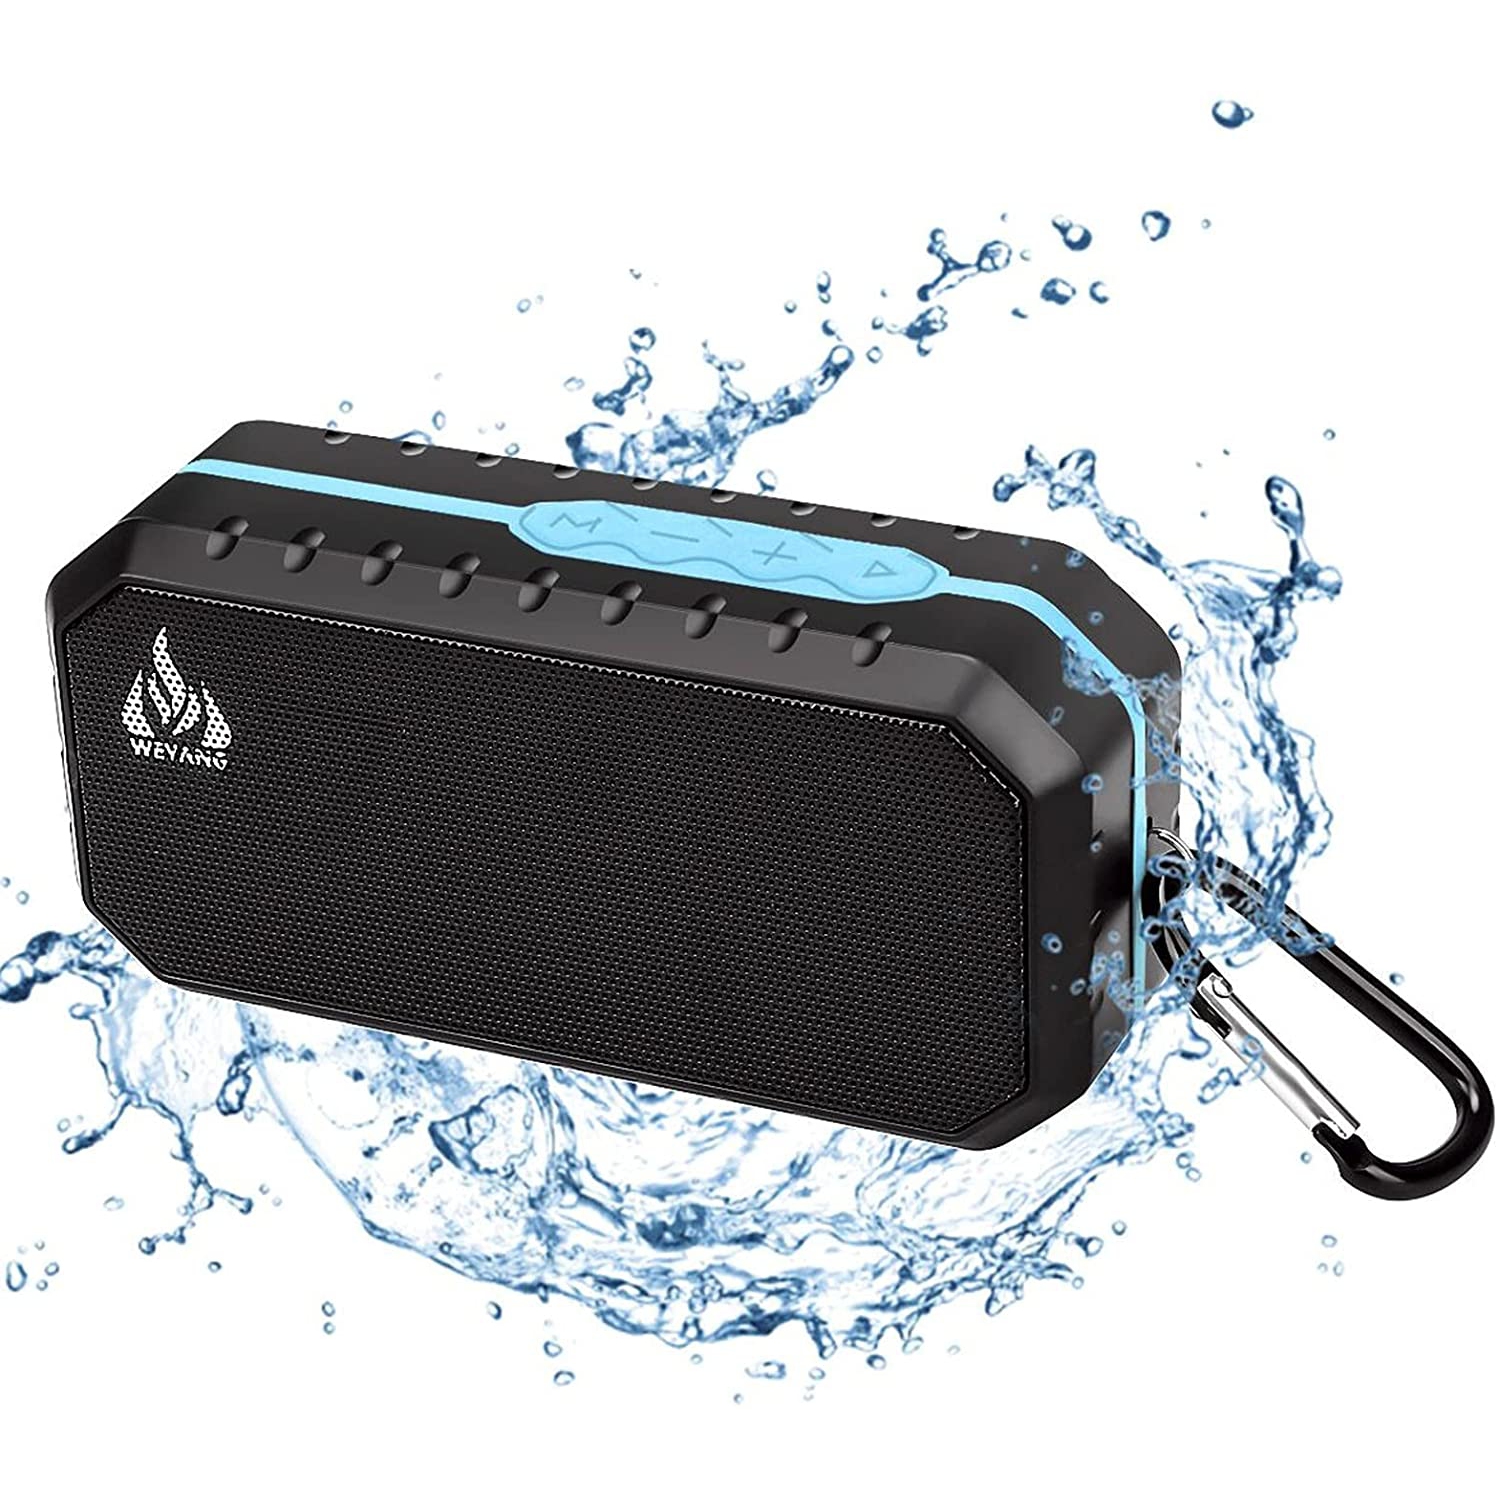 Bluetooth Wireless Speakers Waterproof IPX5 with HD d Bass Outdoor Wireless Portable Phone Speakers Built-in Mic